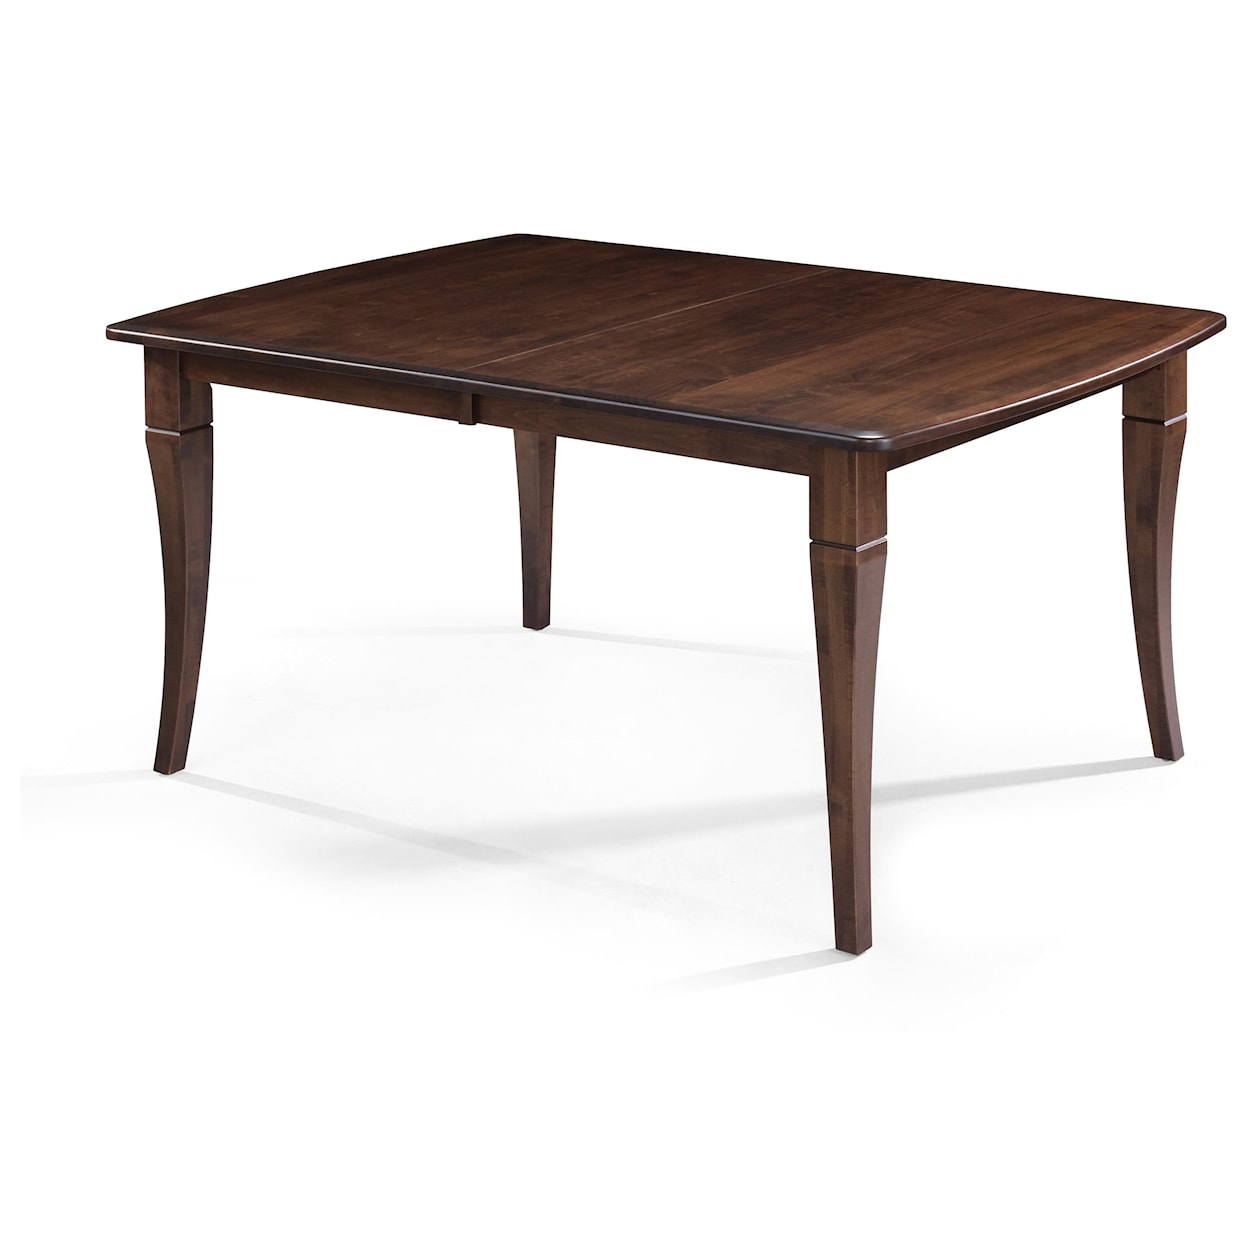 Archbold Furniture Amish Essentials Bow End Dining Table